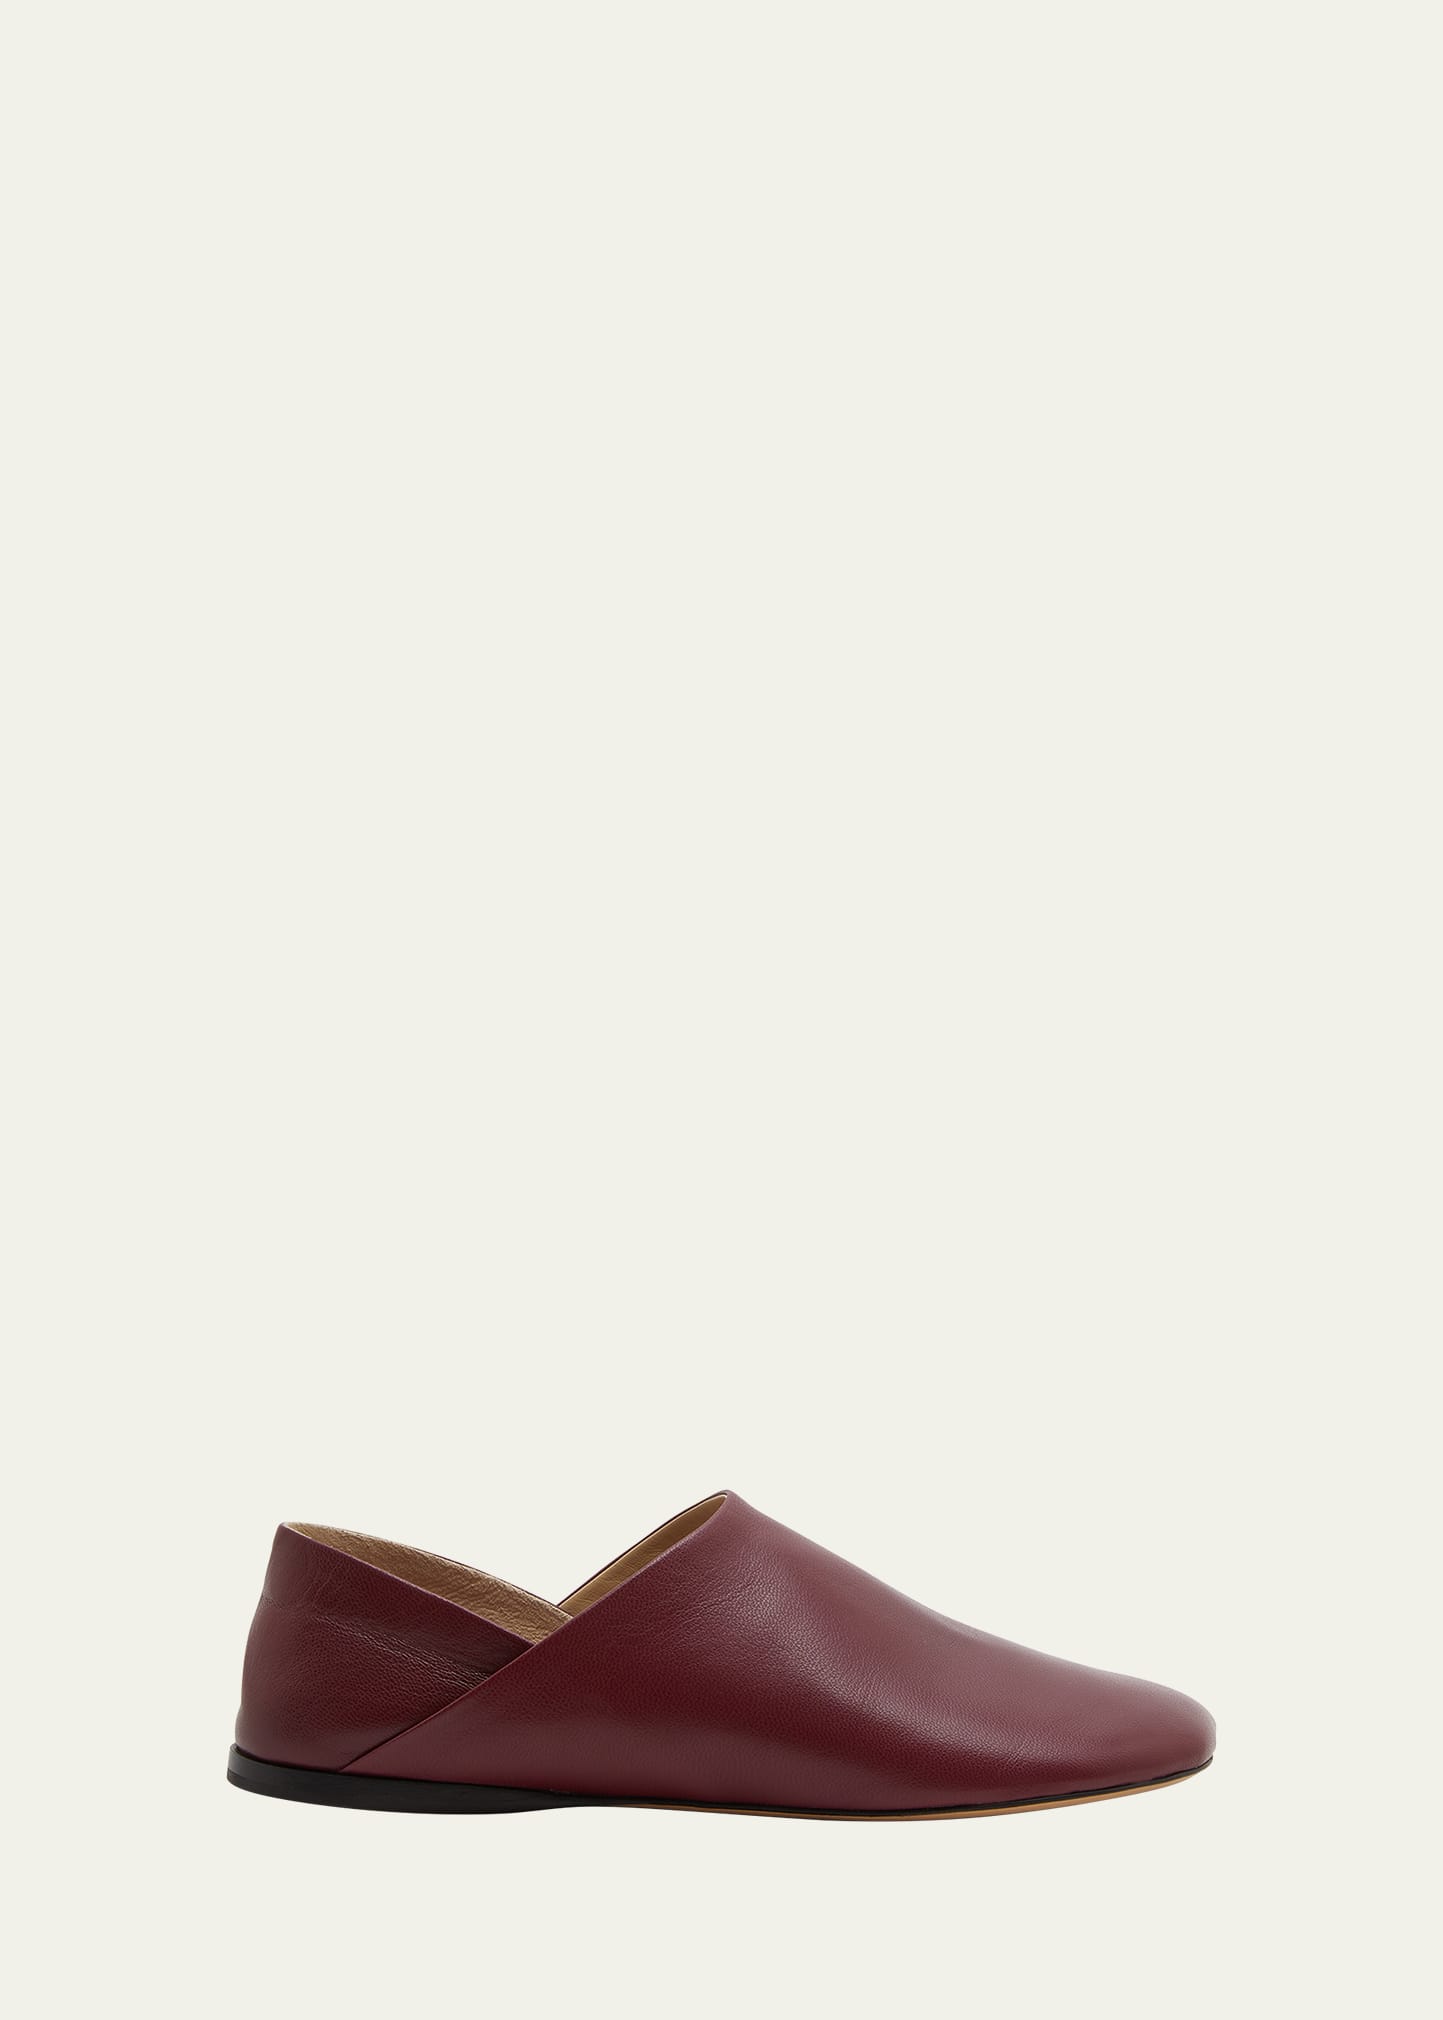 Loewe Toy Leather Slipper Loafers In Burgundy